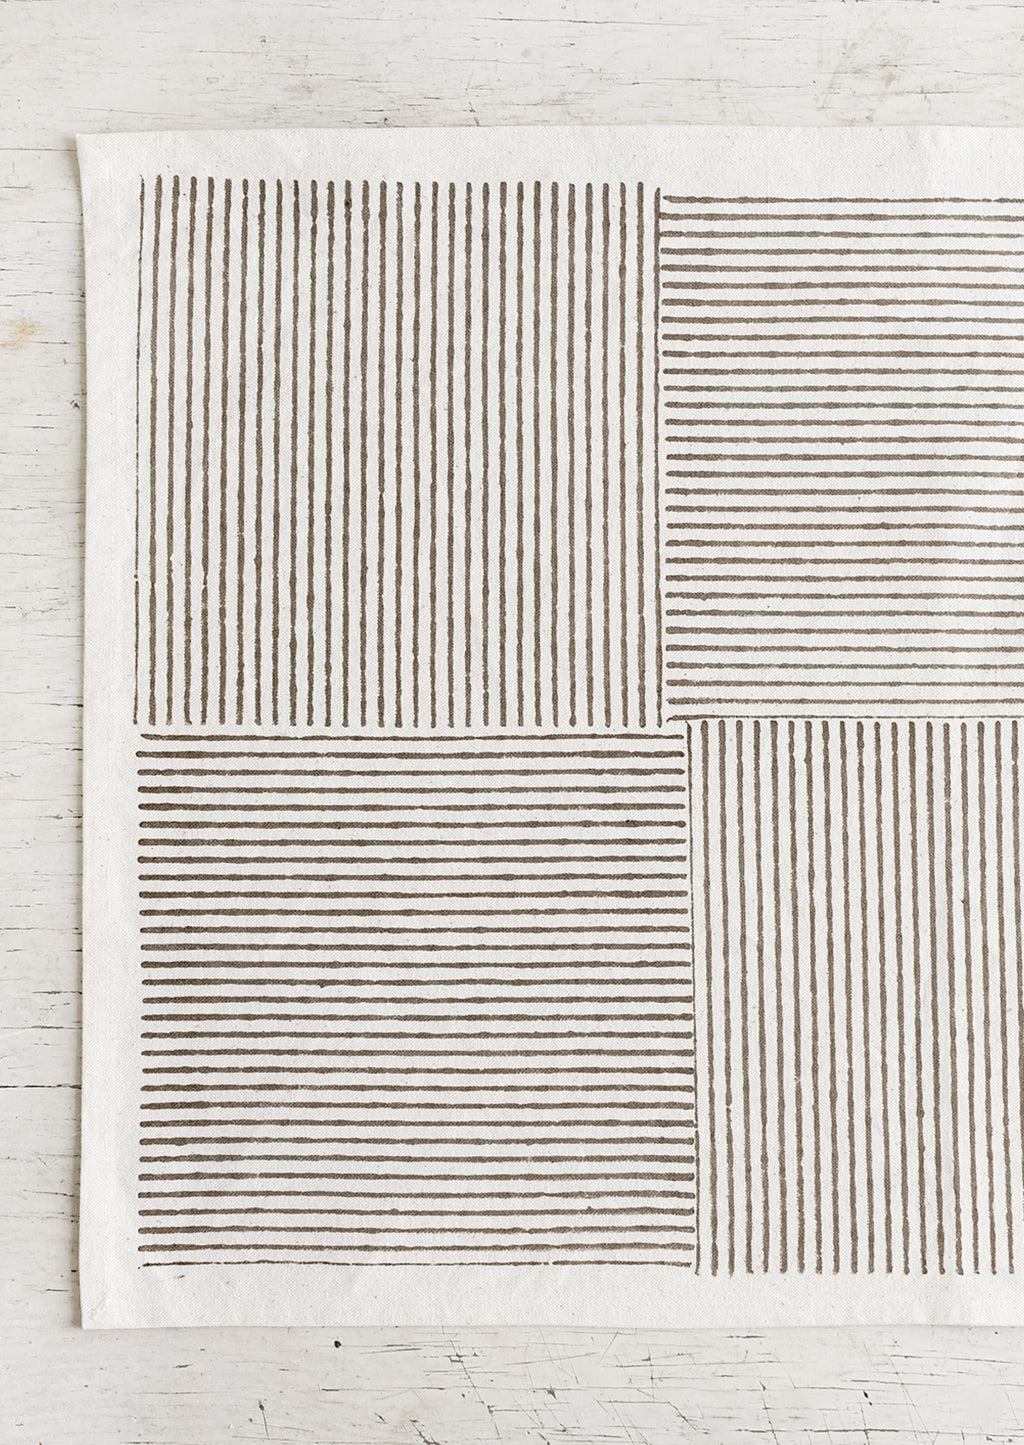 Natural / Khaki: Block printed cotton placemats with boxed stripe pattern in khaki.